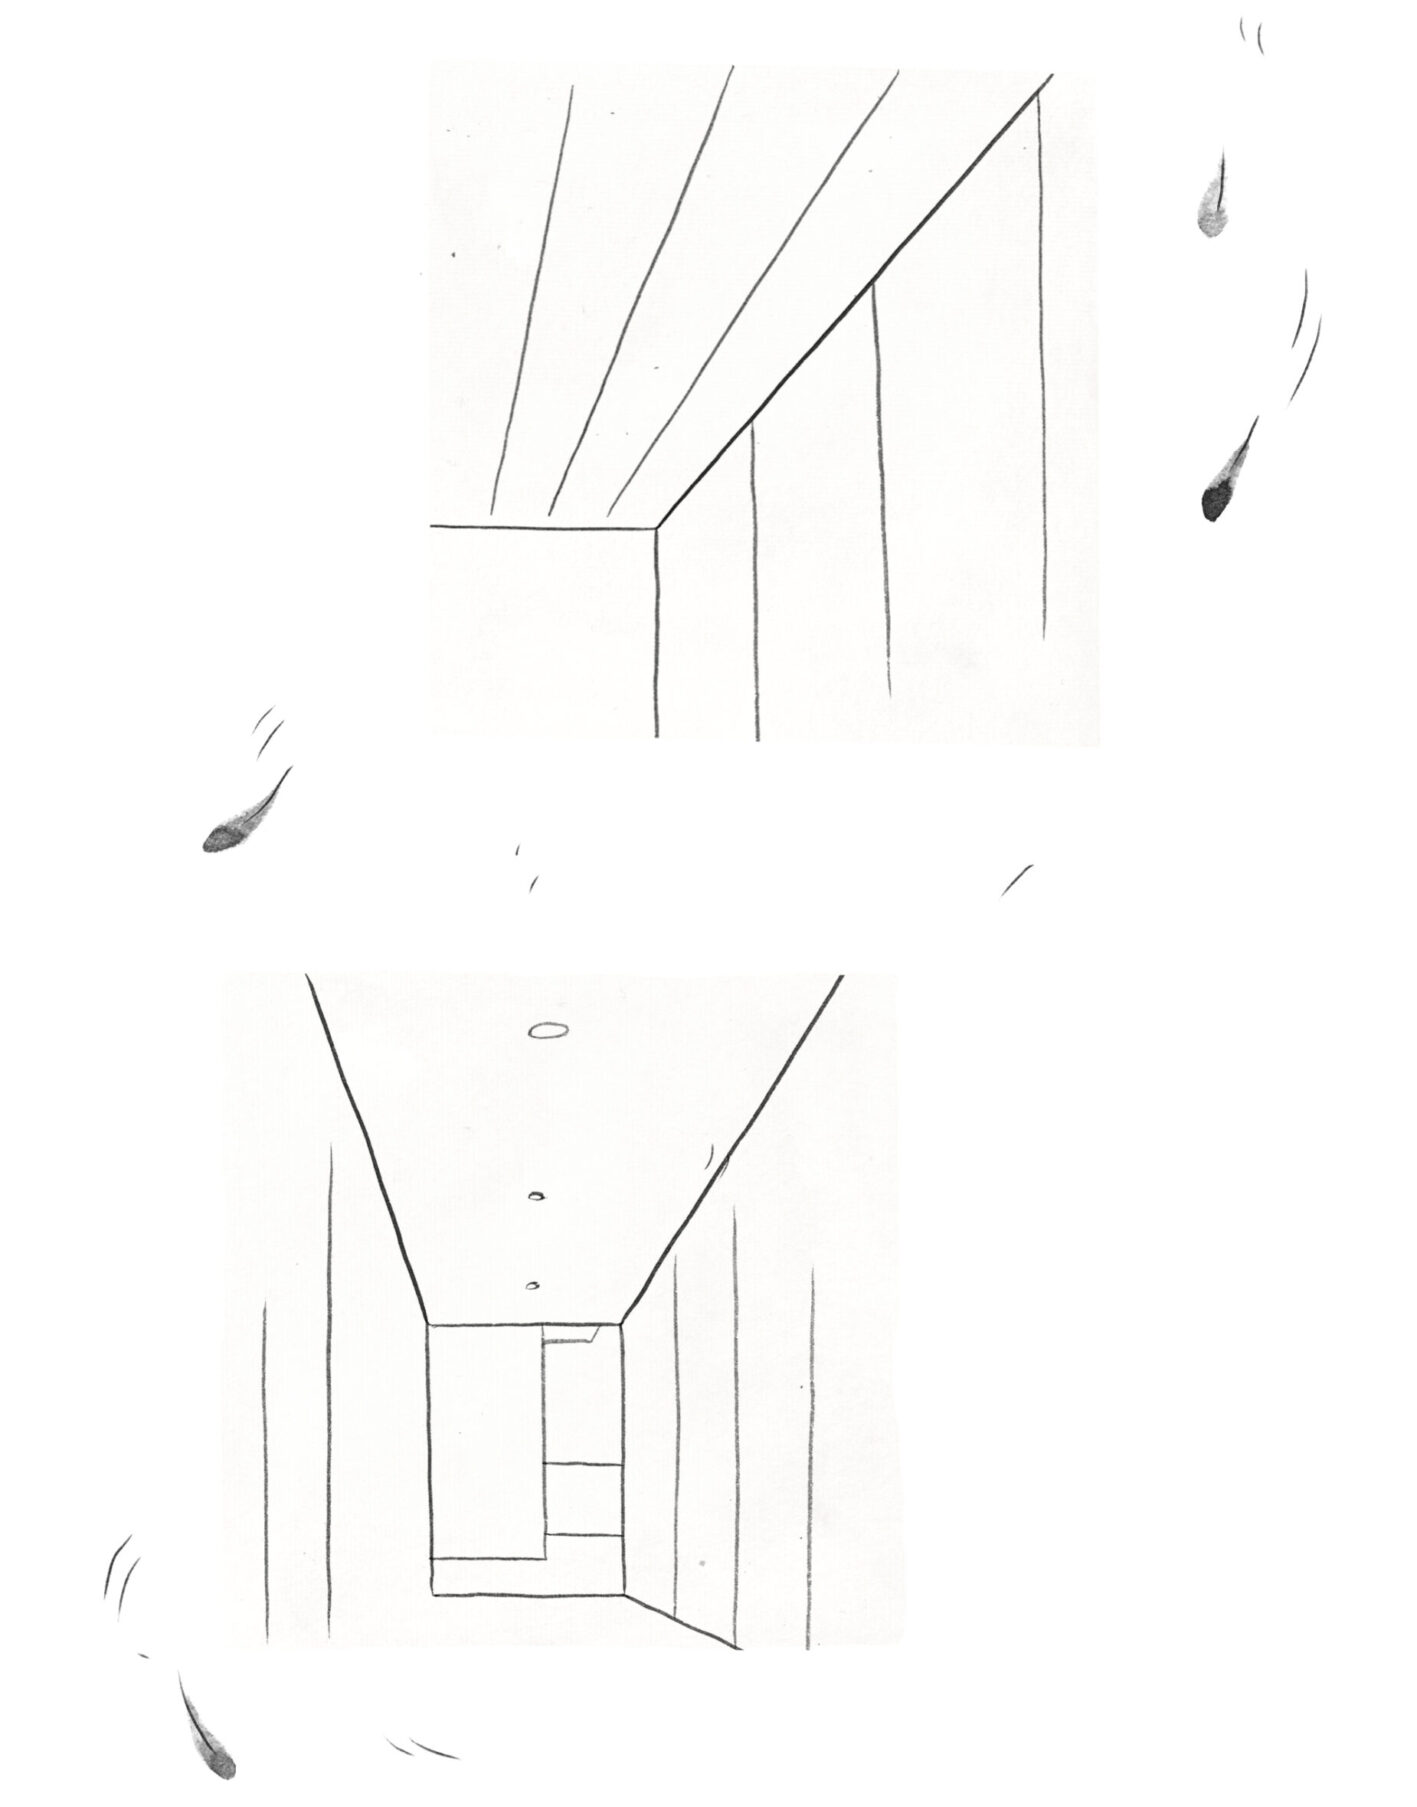 More images which cut off so as to only appear as fragments of a house. In the top right, the corner of a ceiling as it meets the wall, in the bottom left, a hallway running down to the door.